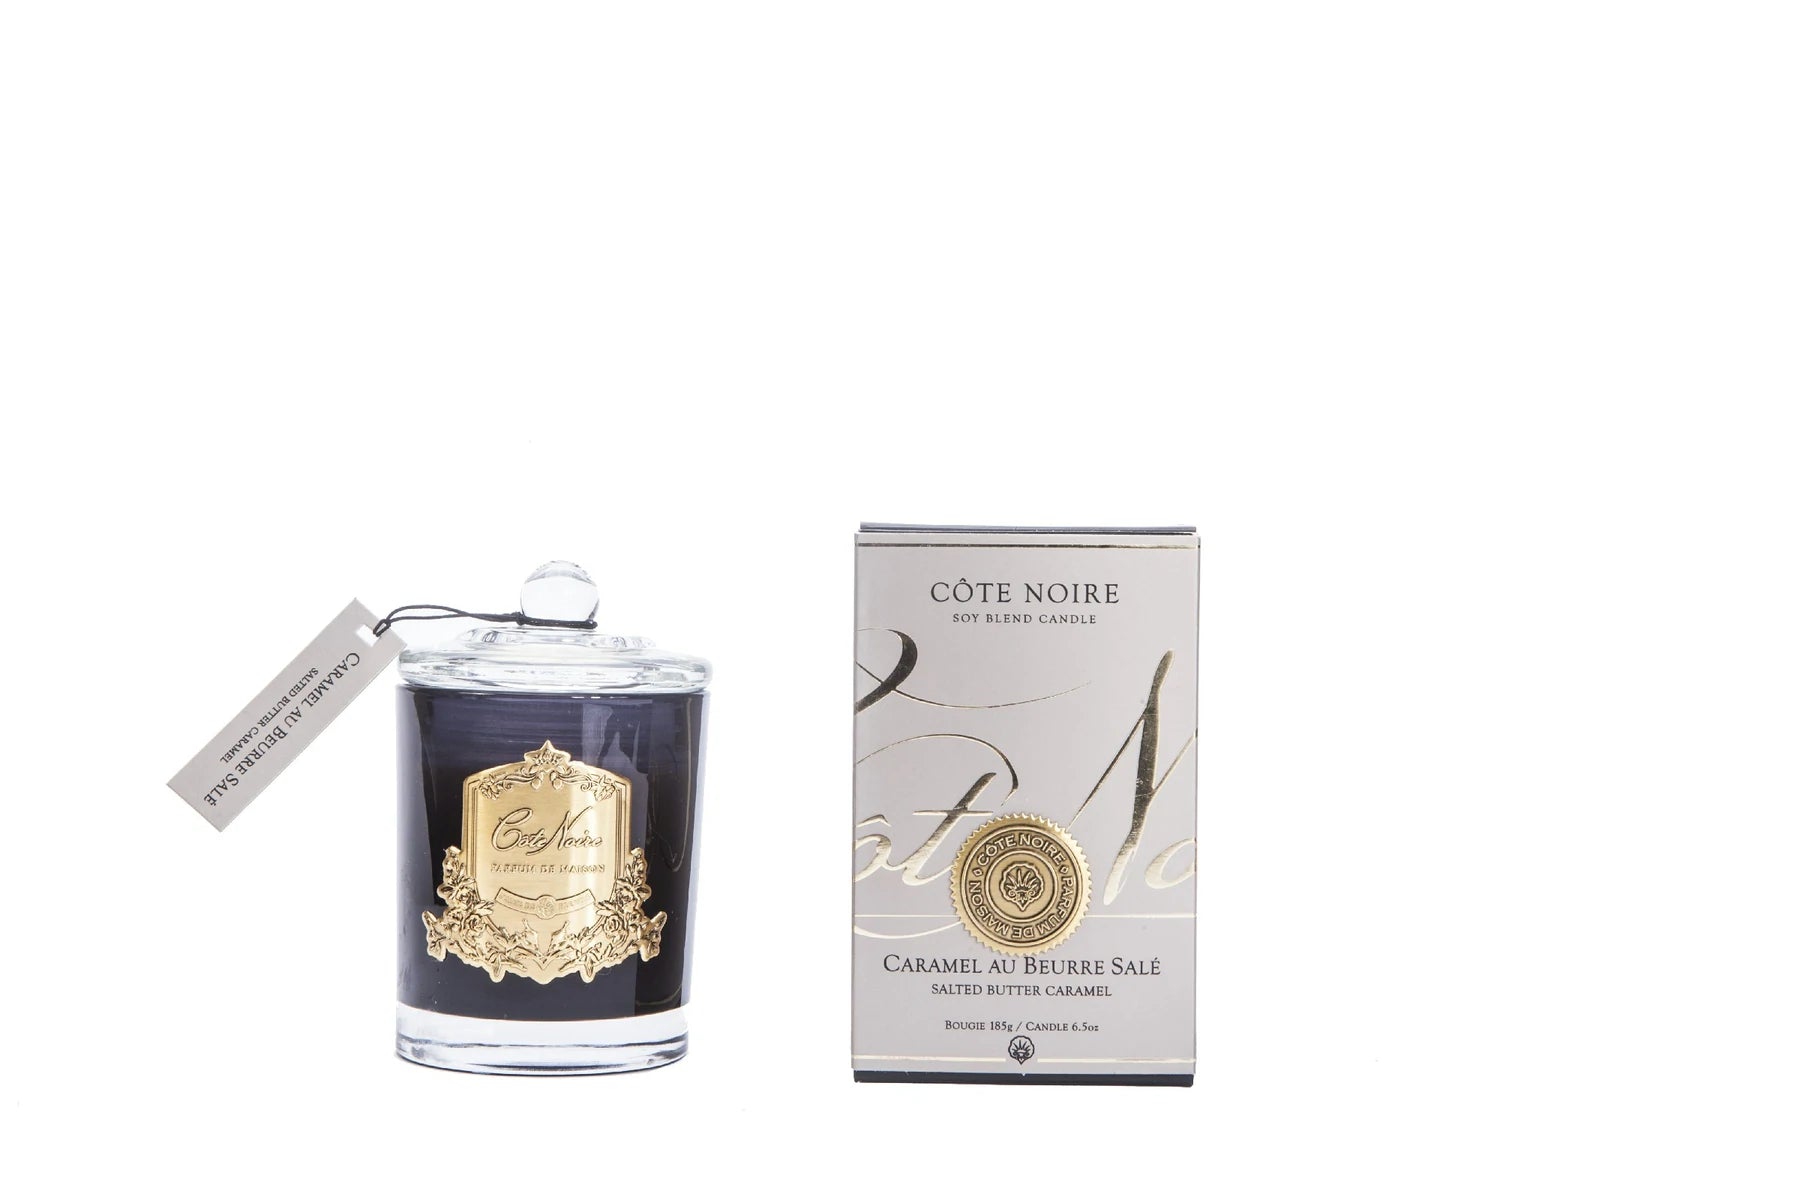 COTE NOIRE - 185G SOY BLEND CANDLE - SALTED BUTTER CARAMEL - GOLD